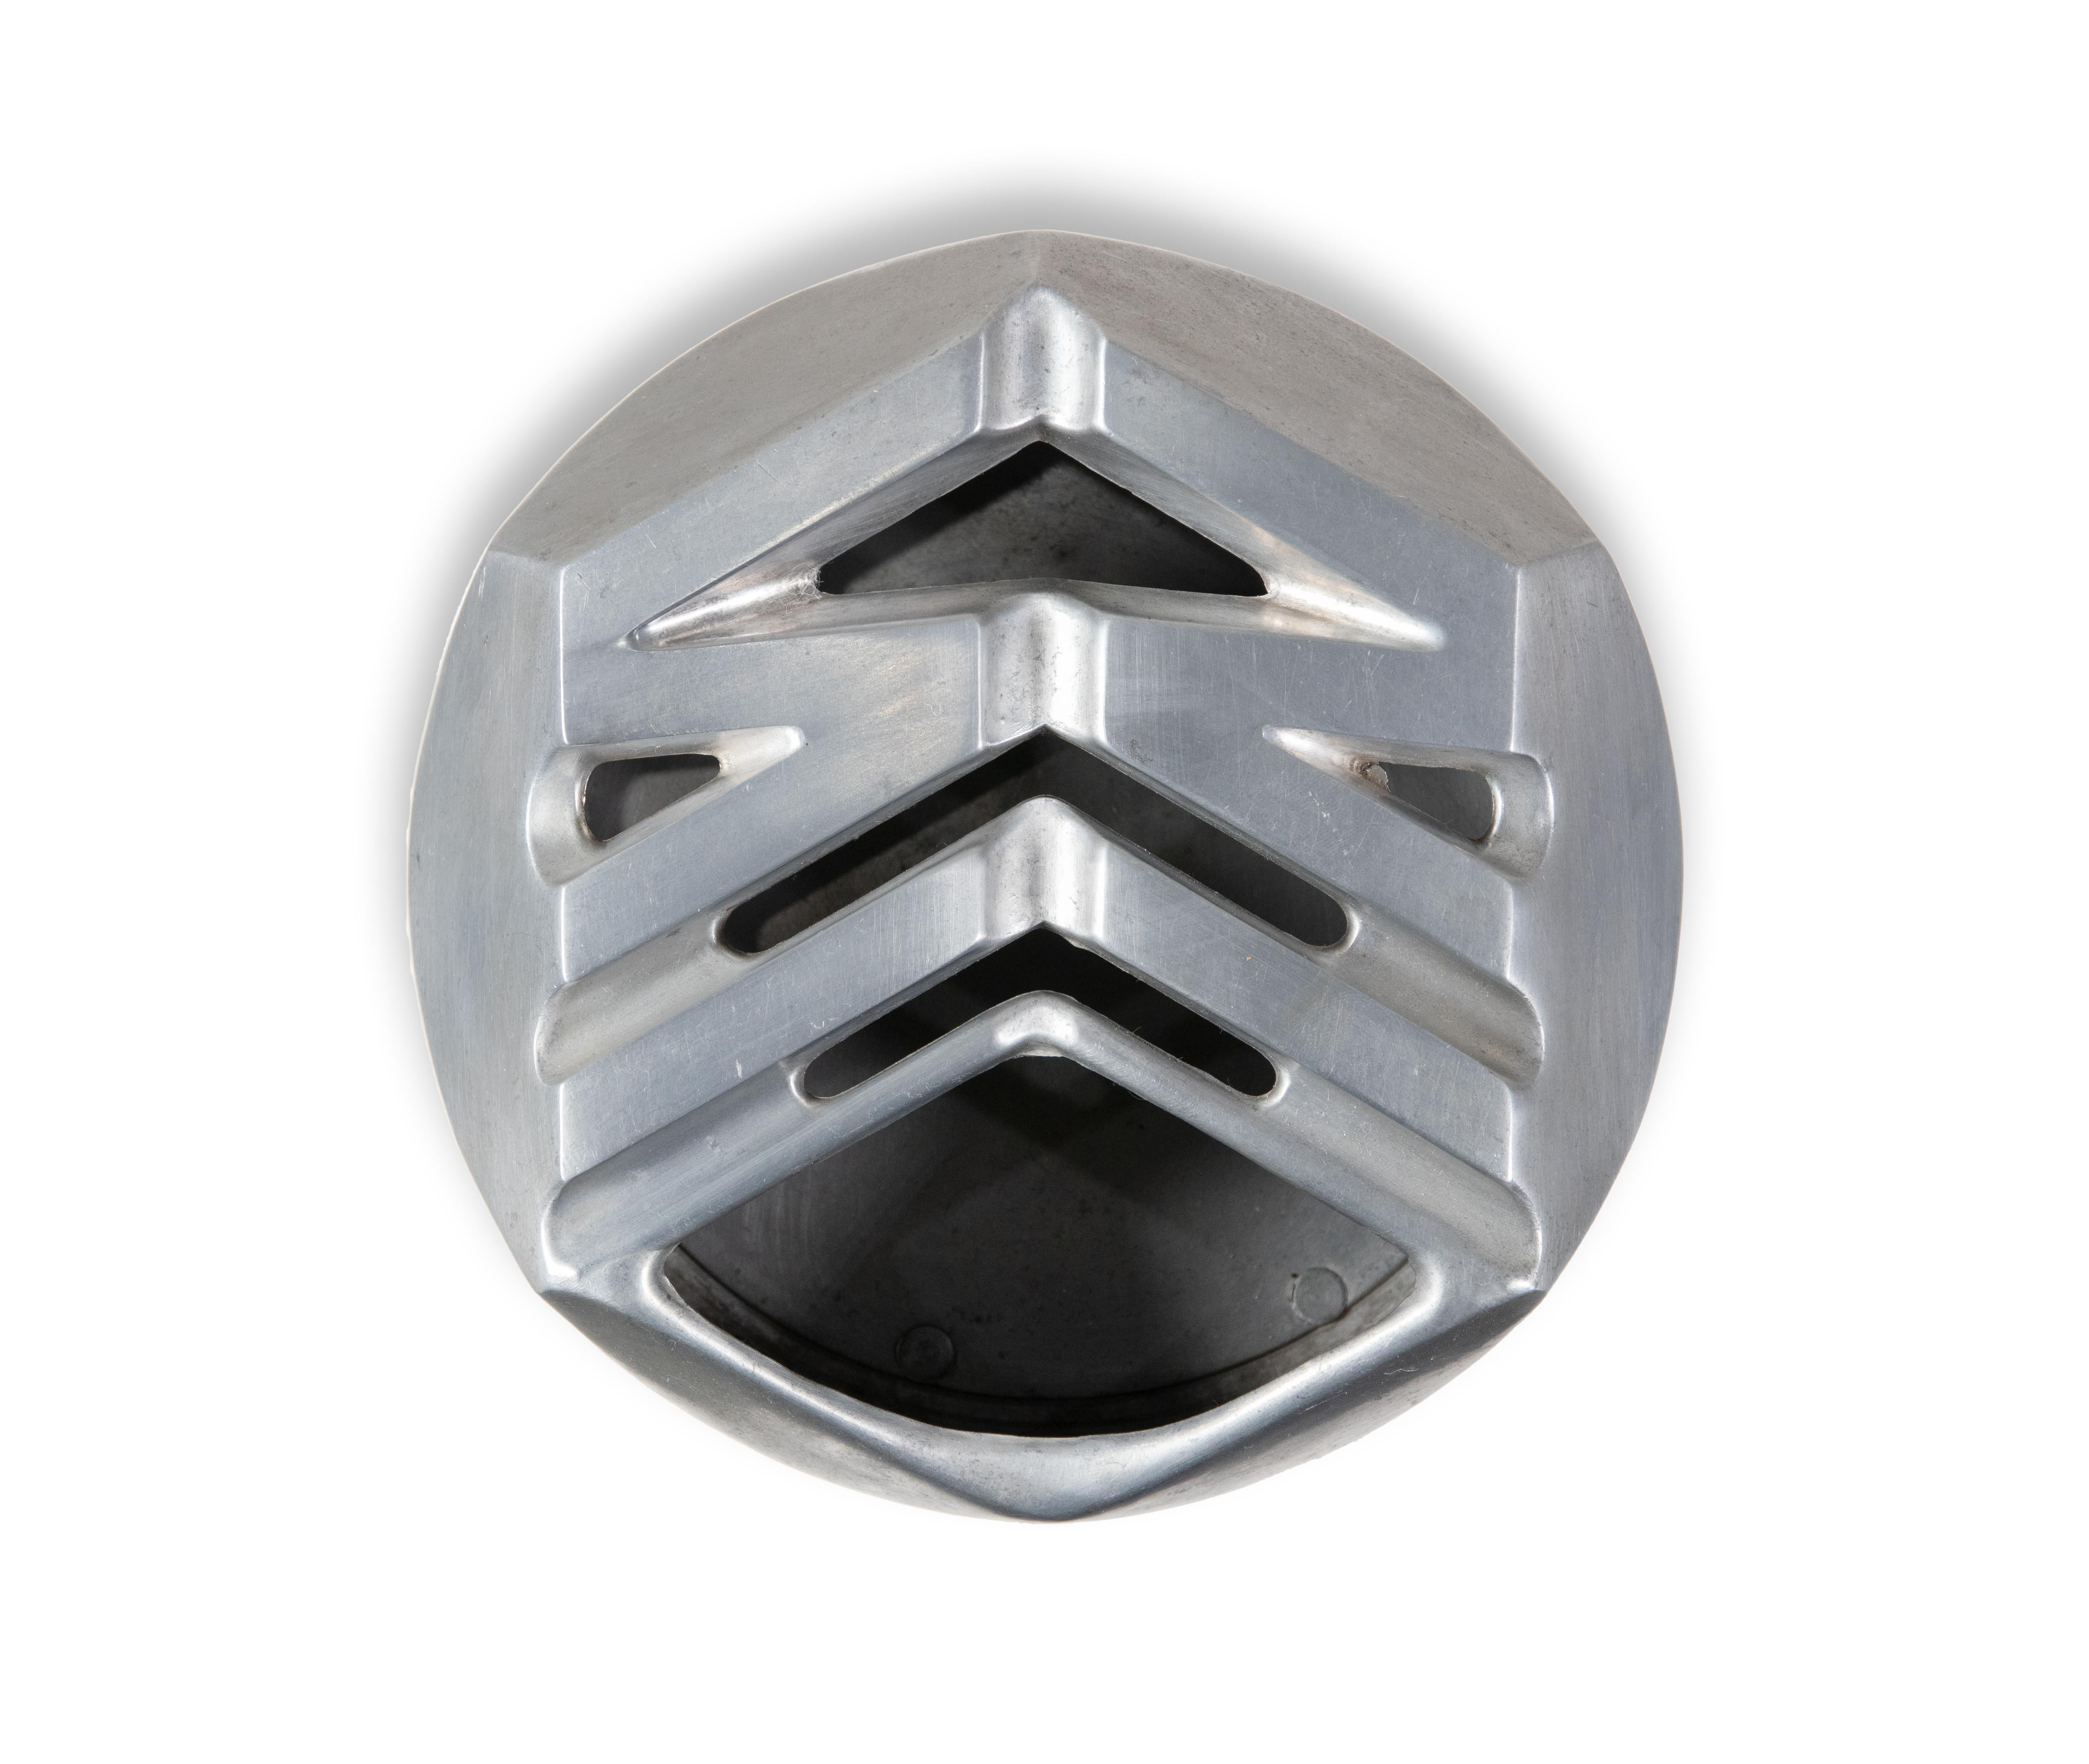 Swedish Solid and Machined Aluminum Apollo PN58 Ashtray by Sersterug Criant, 1960s For Sale